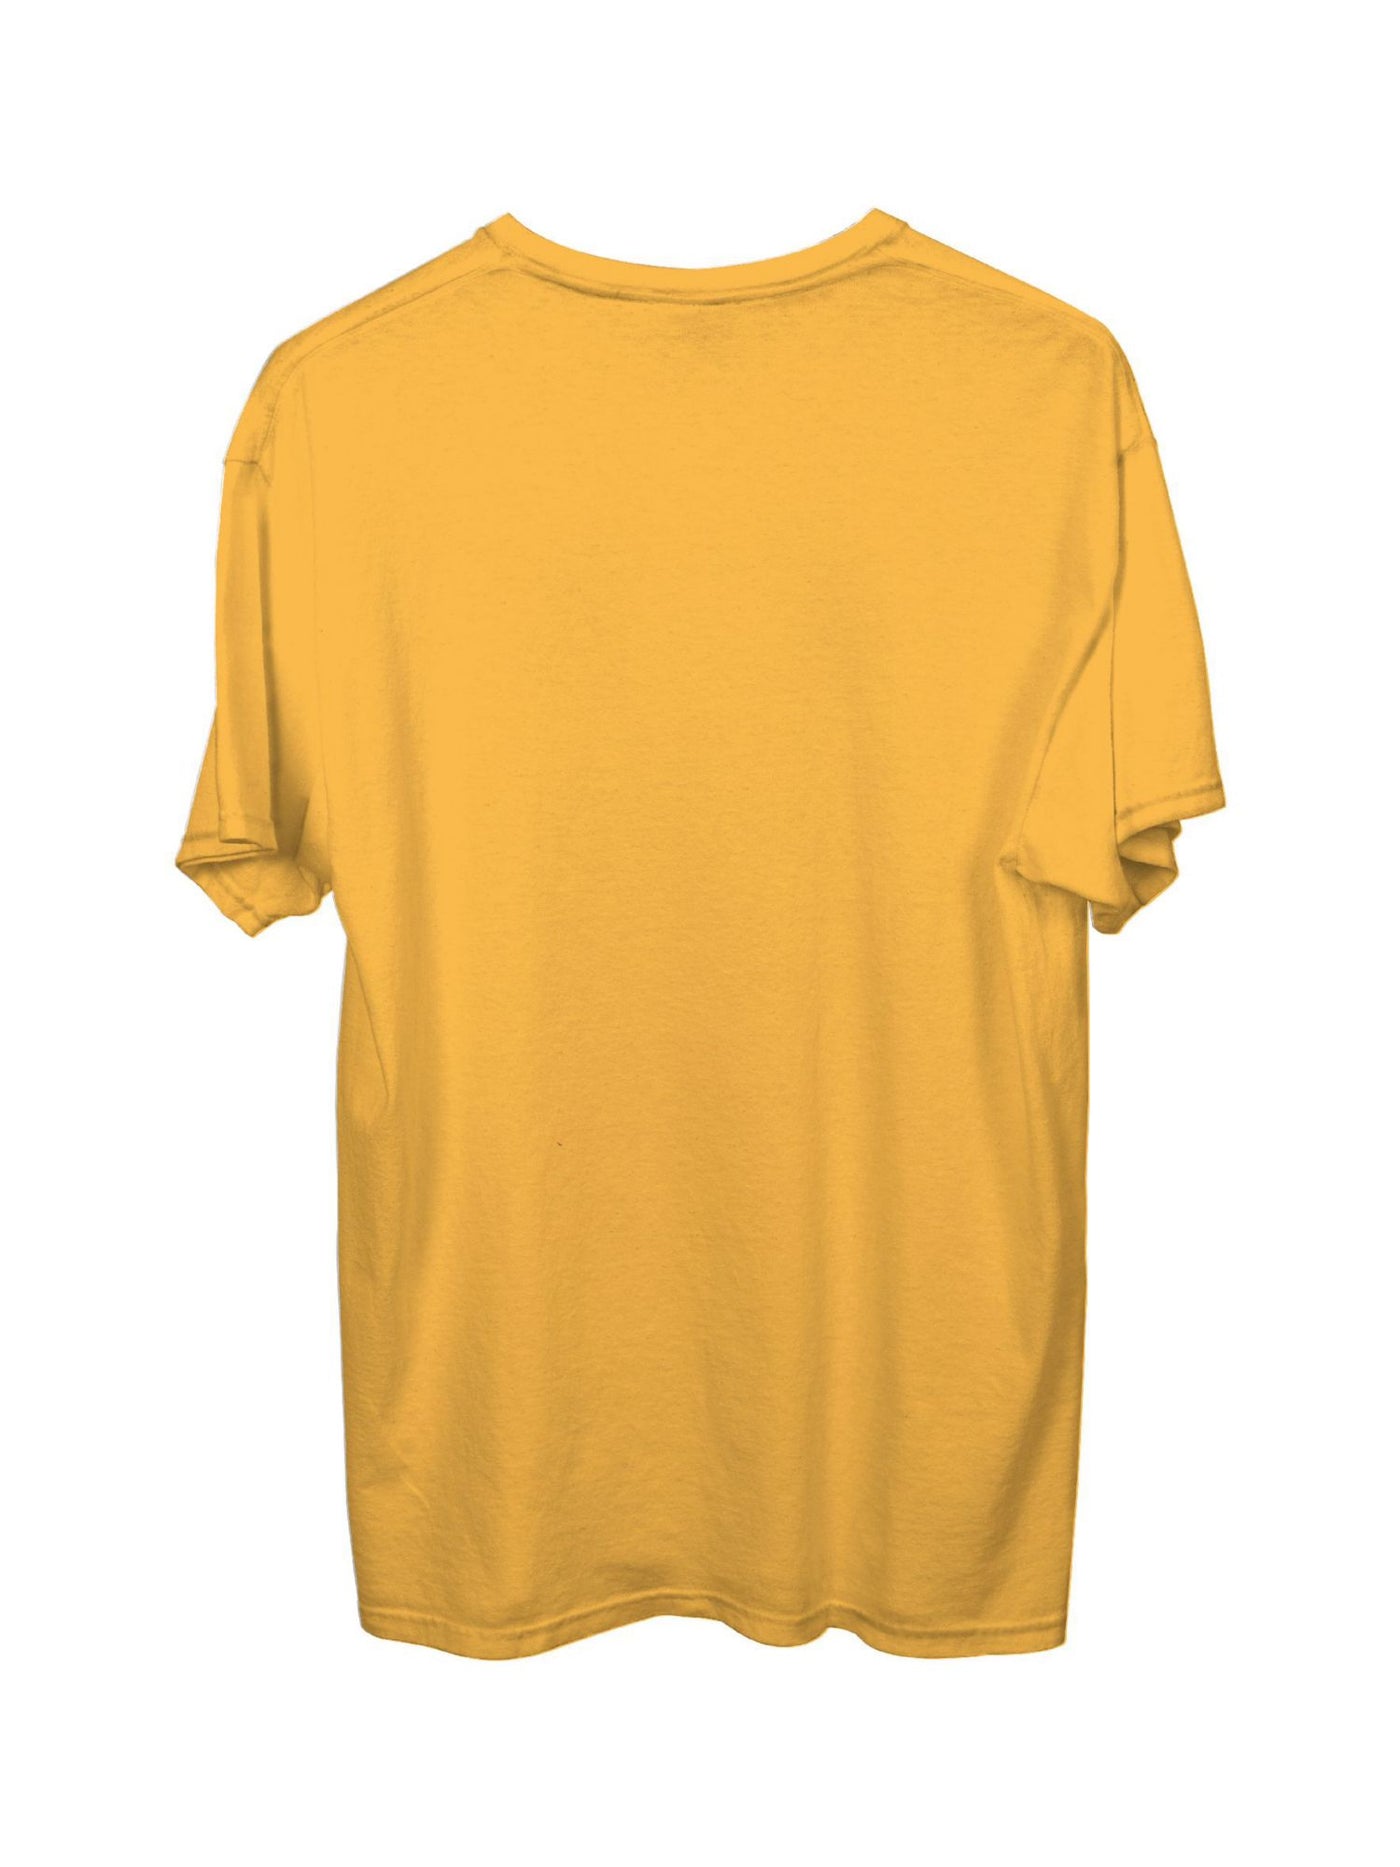 HYBRID APPAREL Mens Beverage Yellow Graphic Classic Fit T-Shirt S